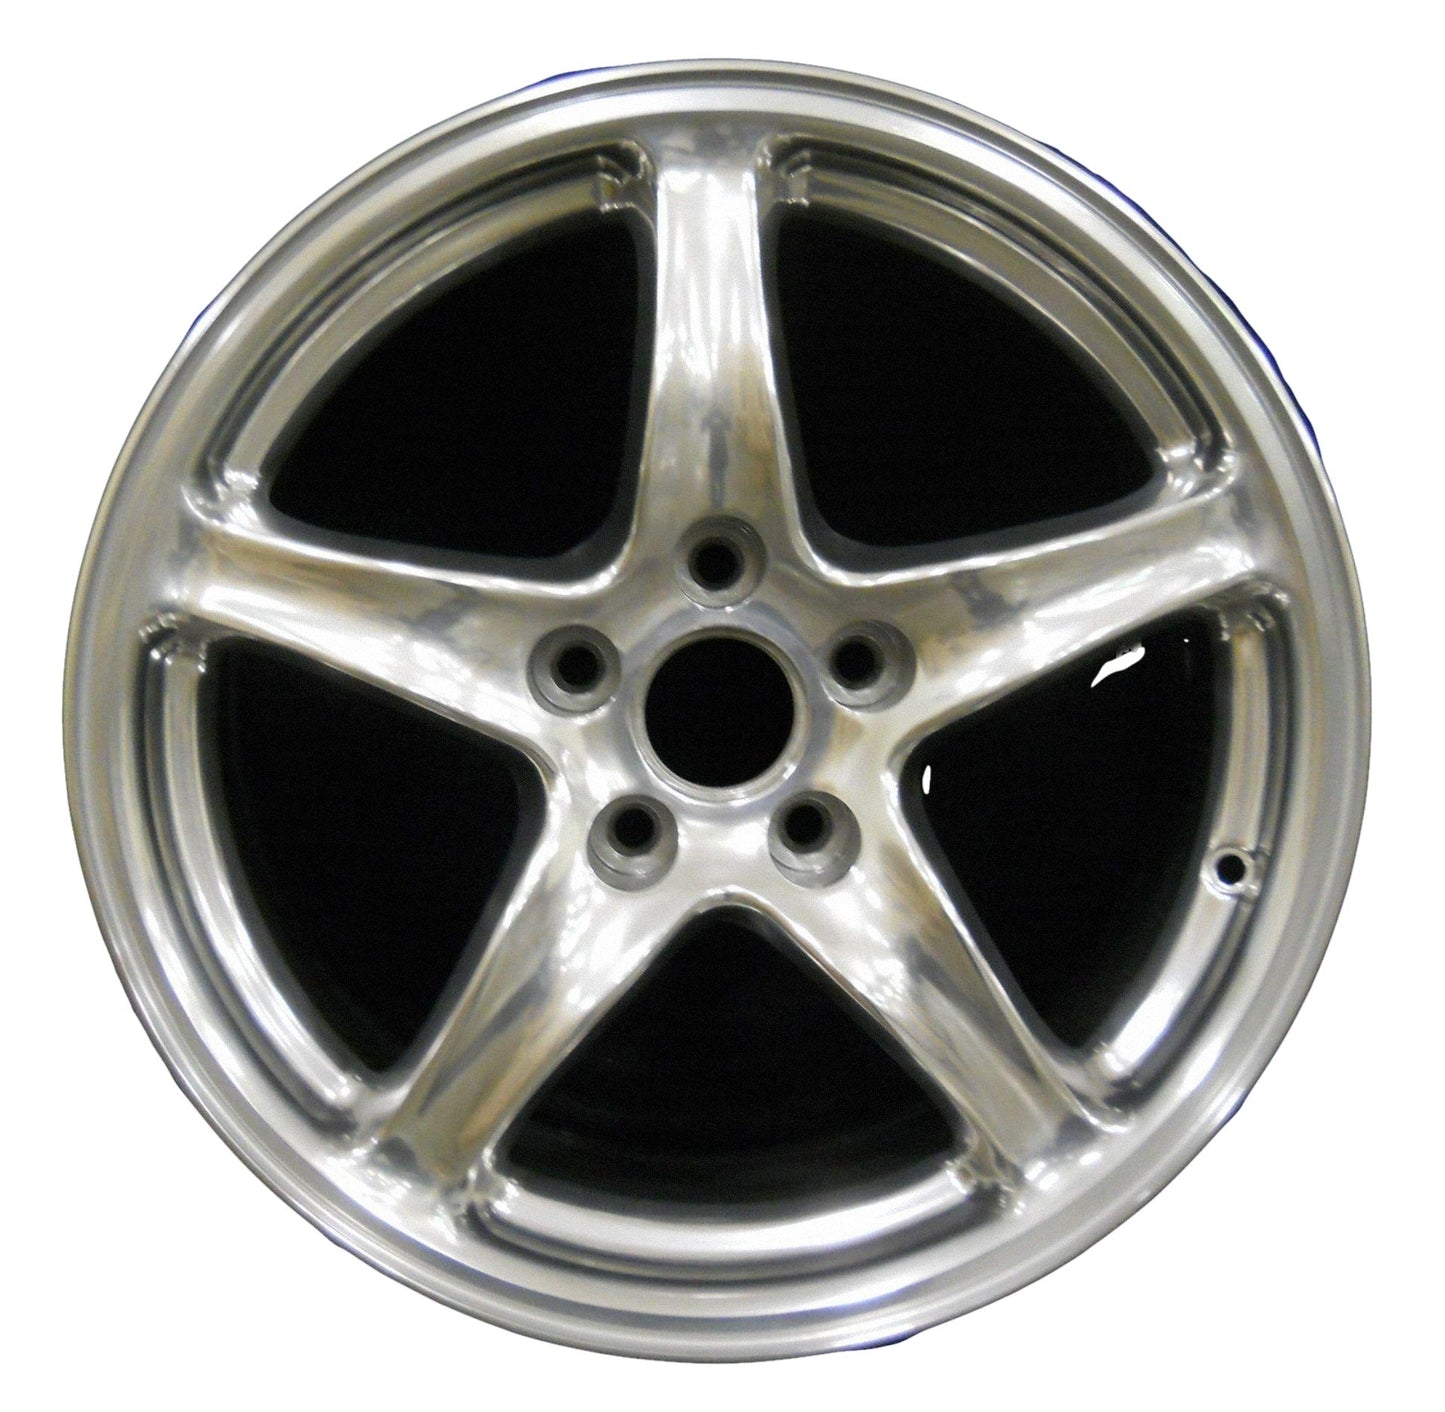 Ford Mustang  1998, 1999, 2000, 2001, 2002, 2003, 2004 Factory OEM Car Wheel Size 17x8 Alloy WAO.3285.FULL.POL